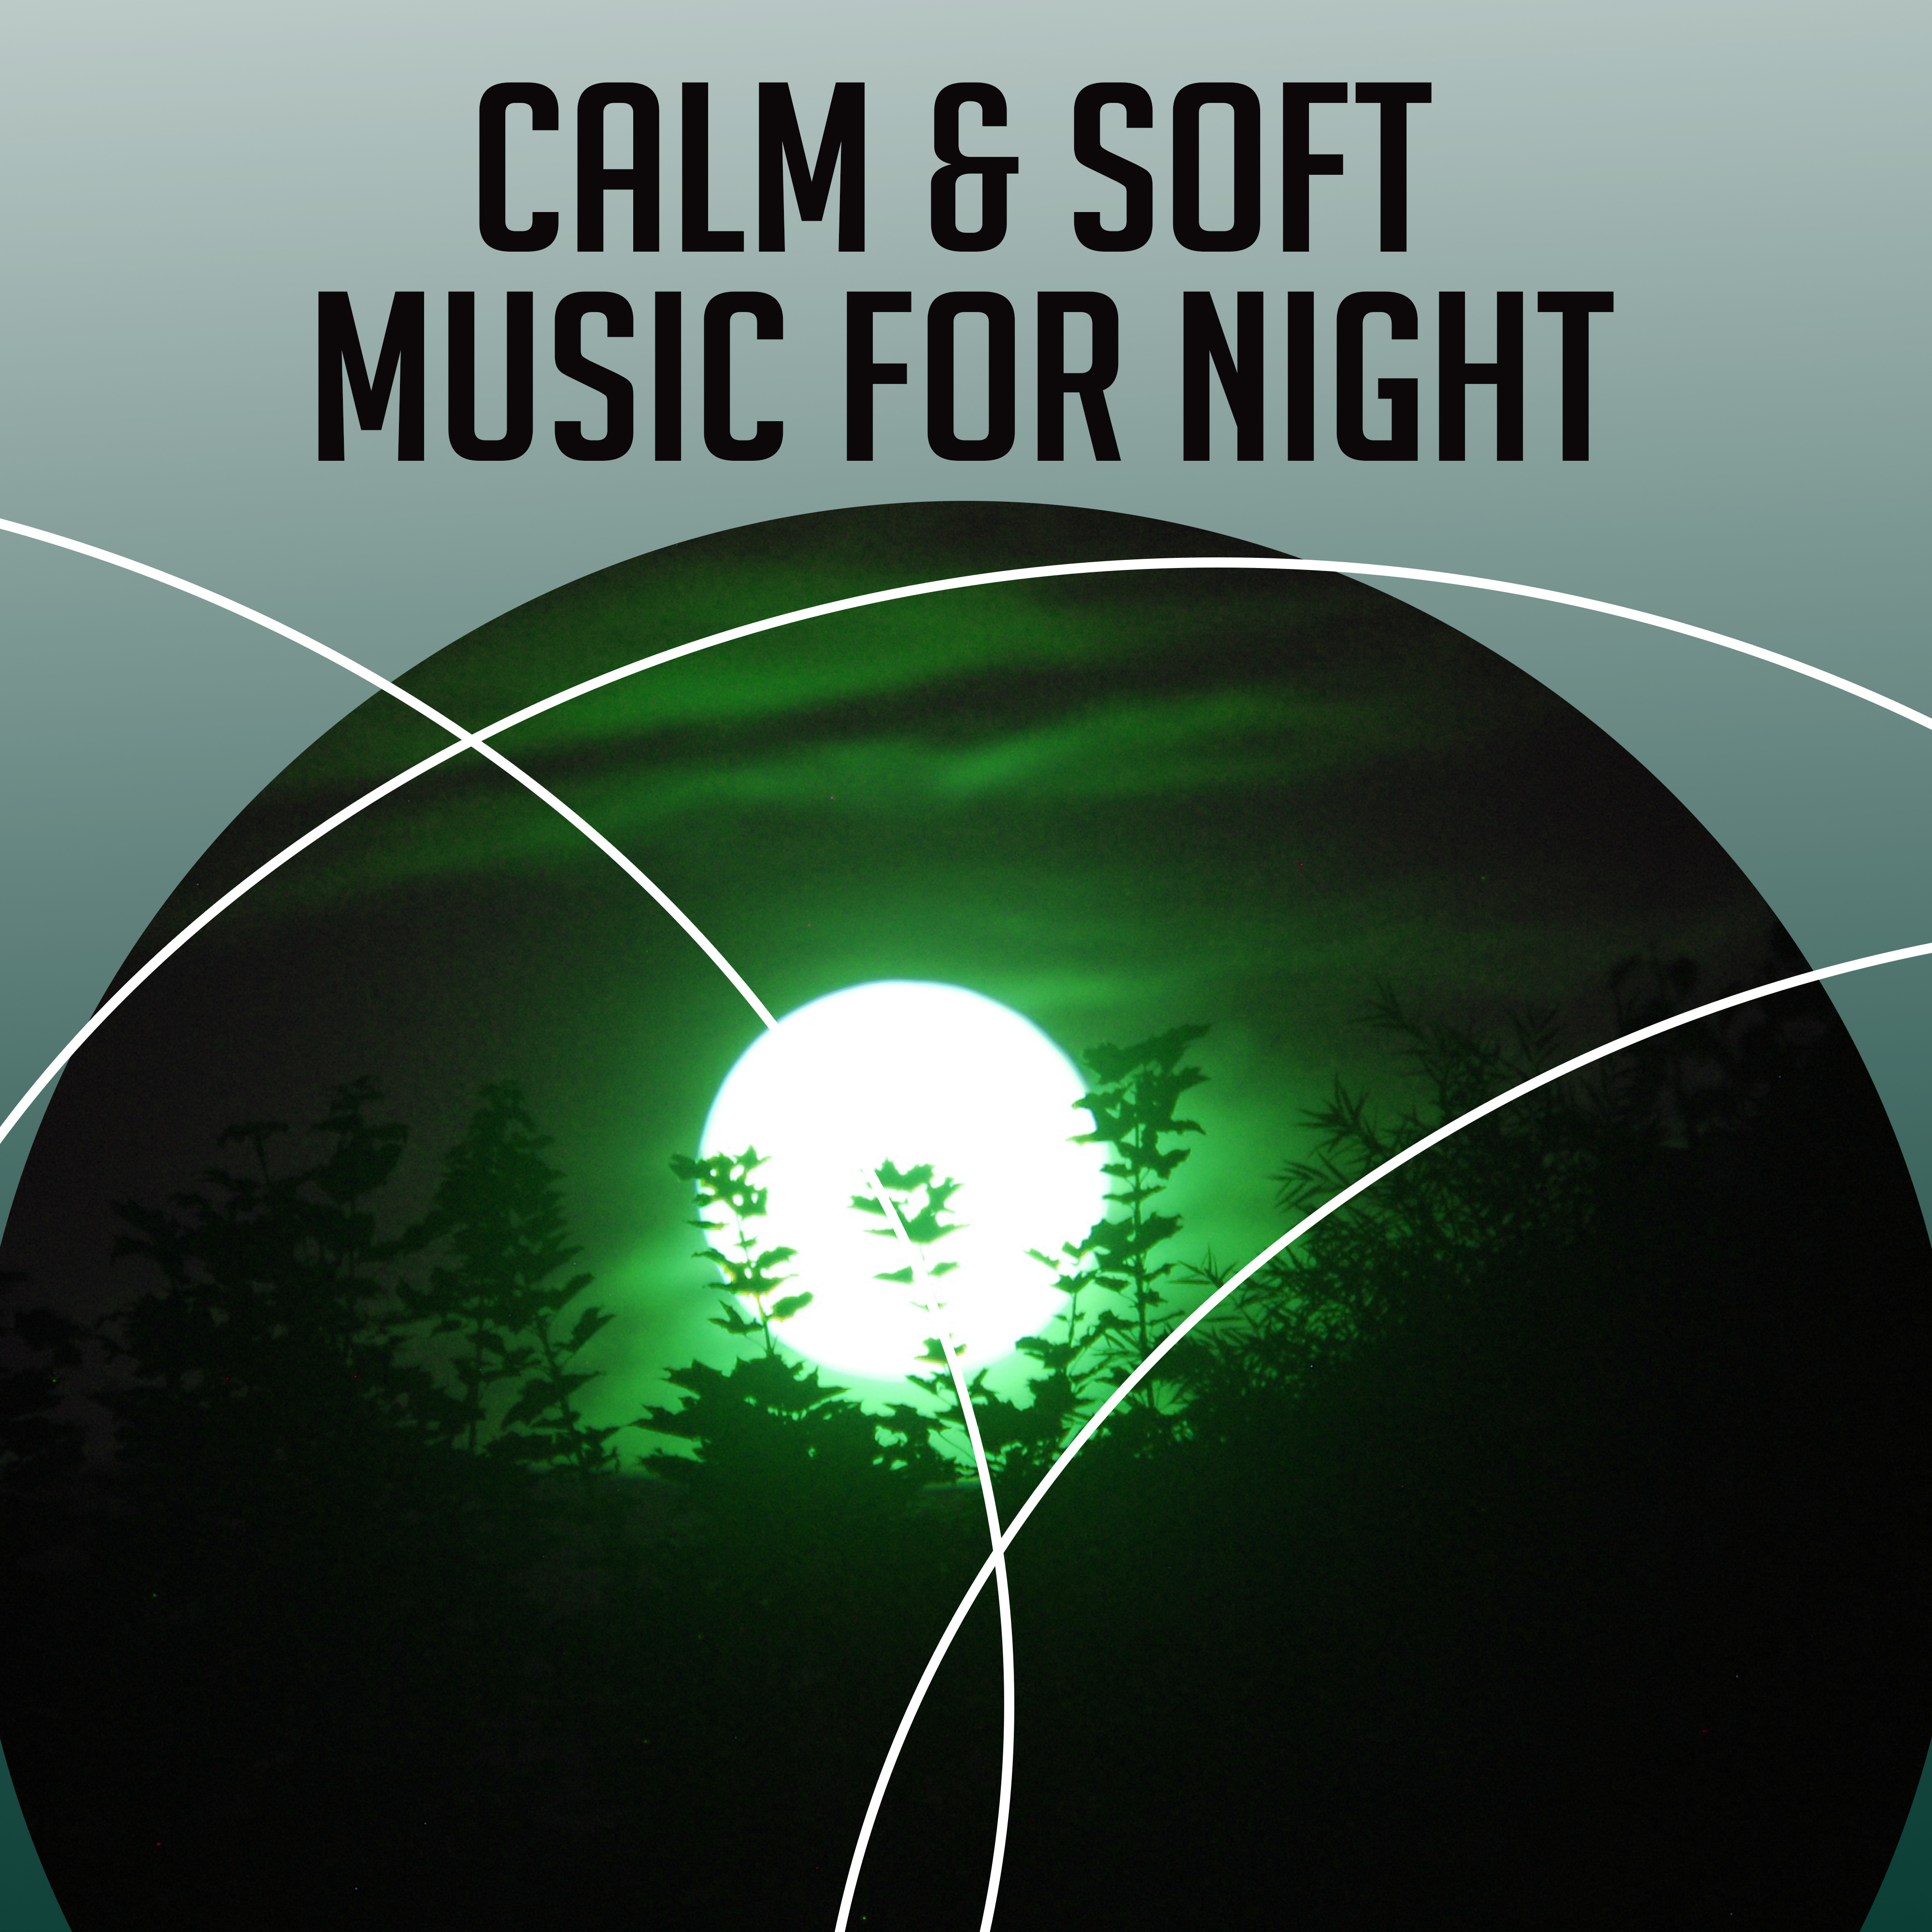 Calm & Soft Music for Night – Self Relaxation, Rest All Night, Soothing Melodies, Sleep Well